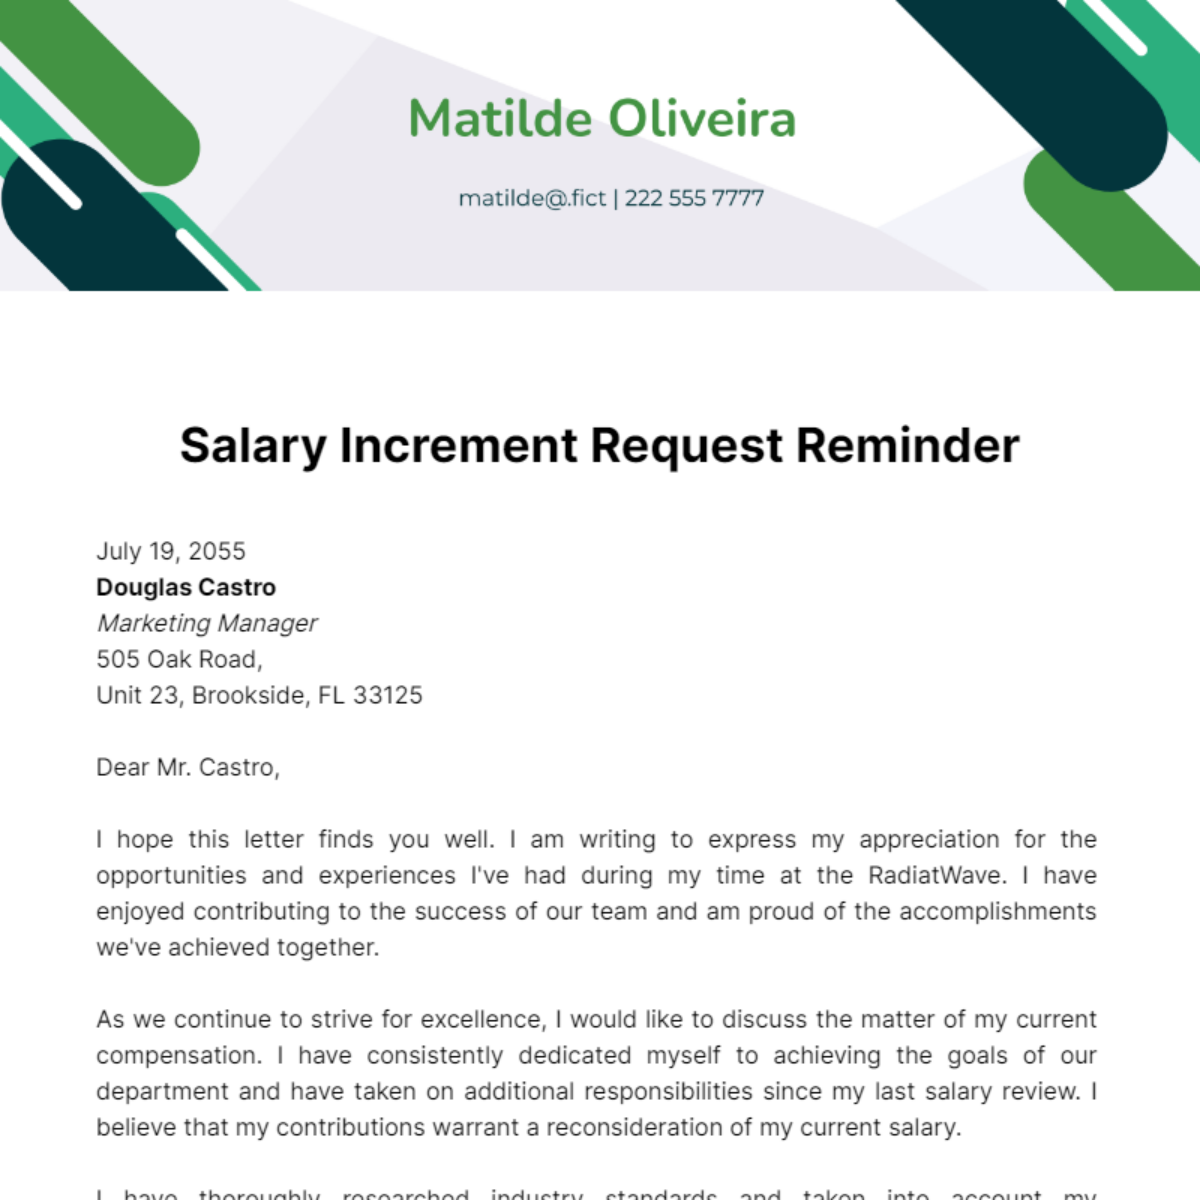 Salary Increment Request Reminder Letter Template